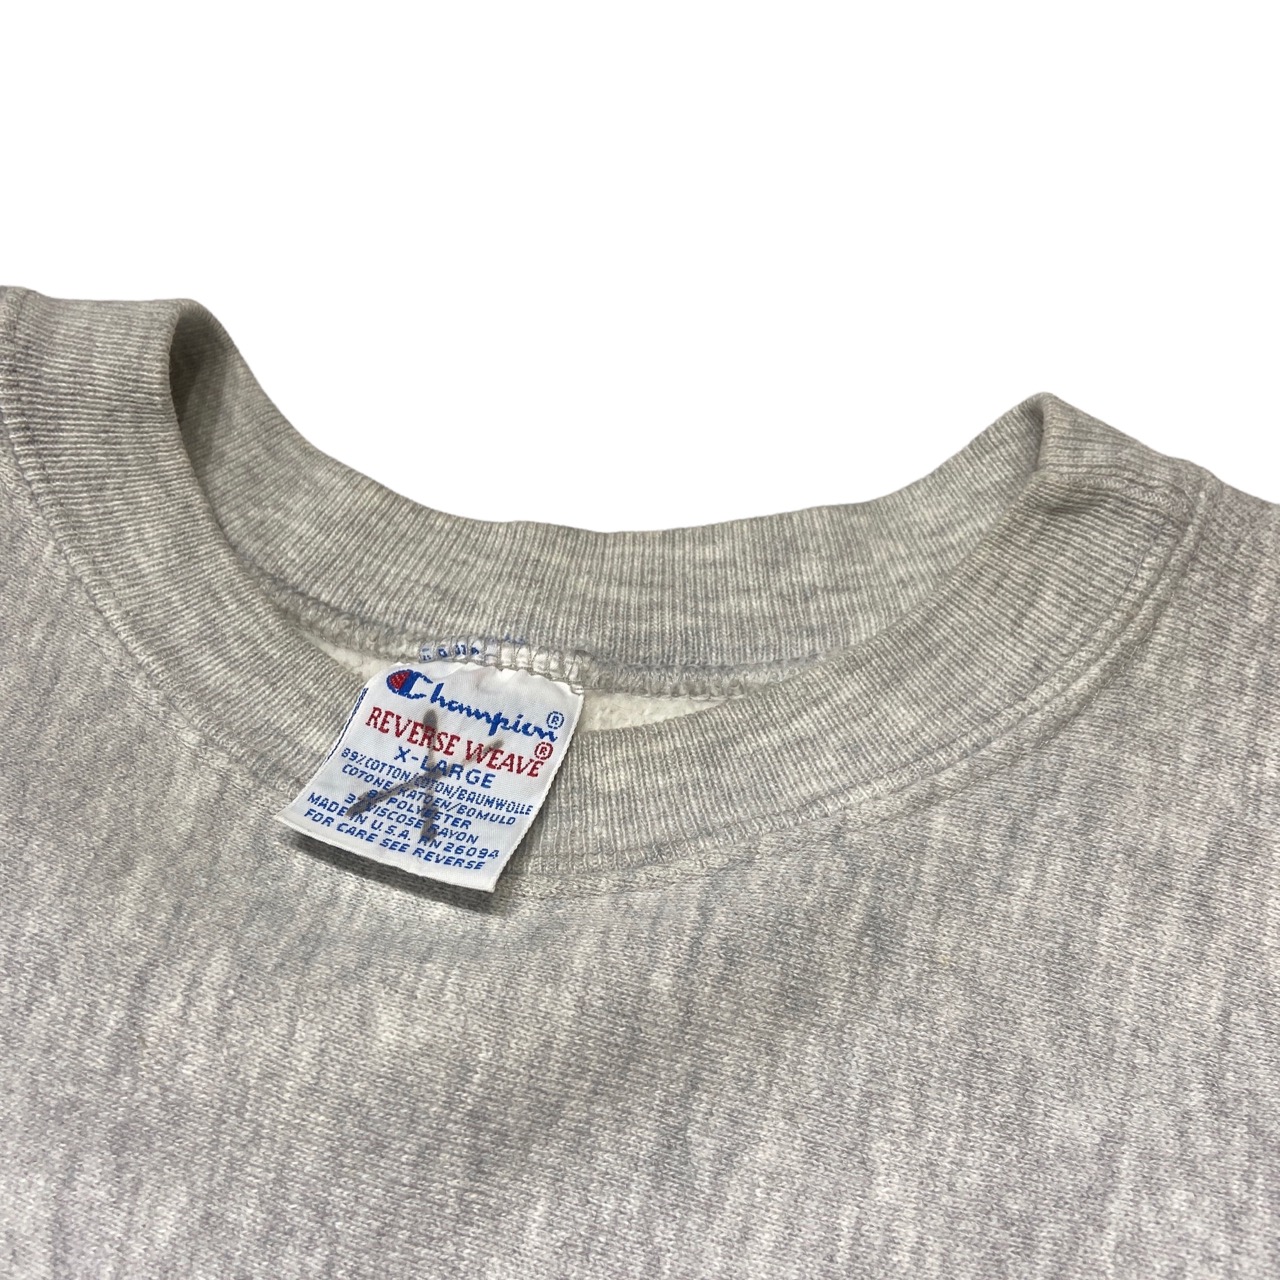 90s Champion Reverse Weave 両面プリント “CORNELL” “C” (SIZE:XL